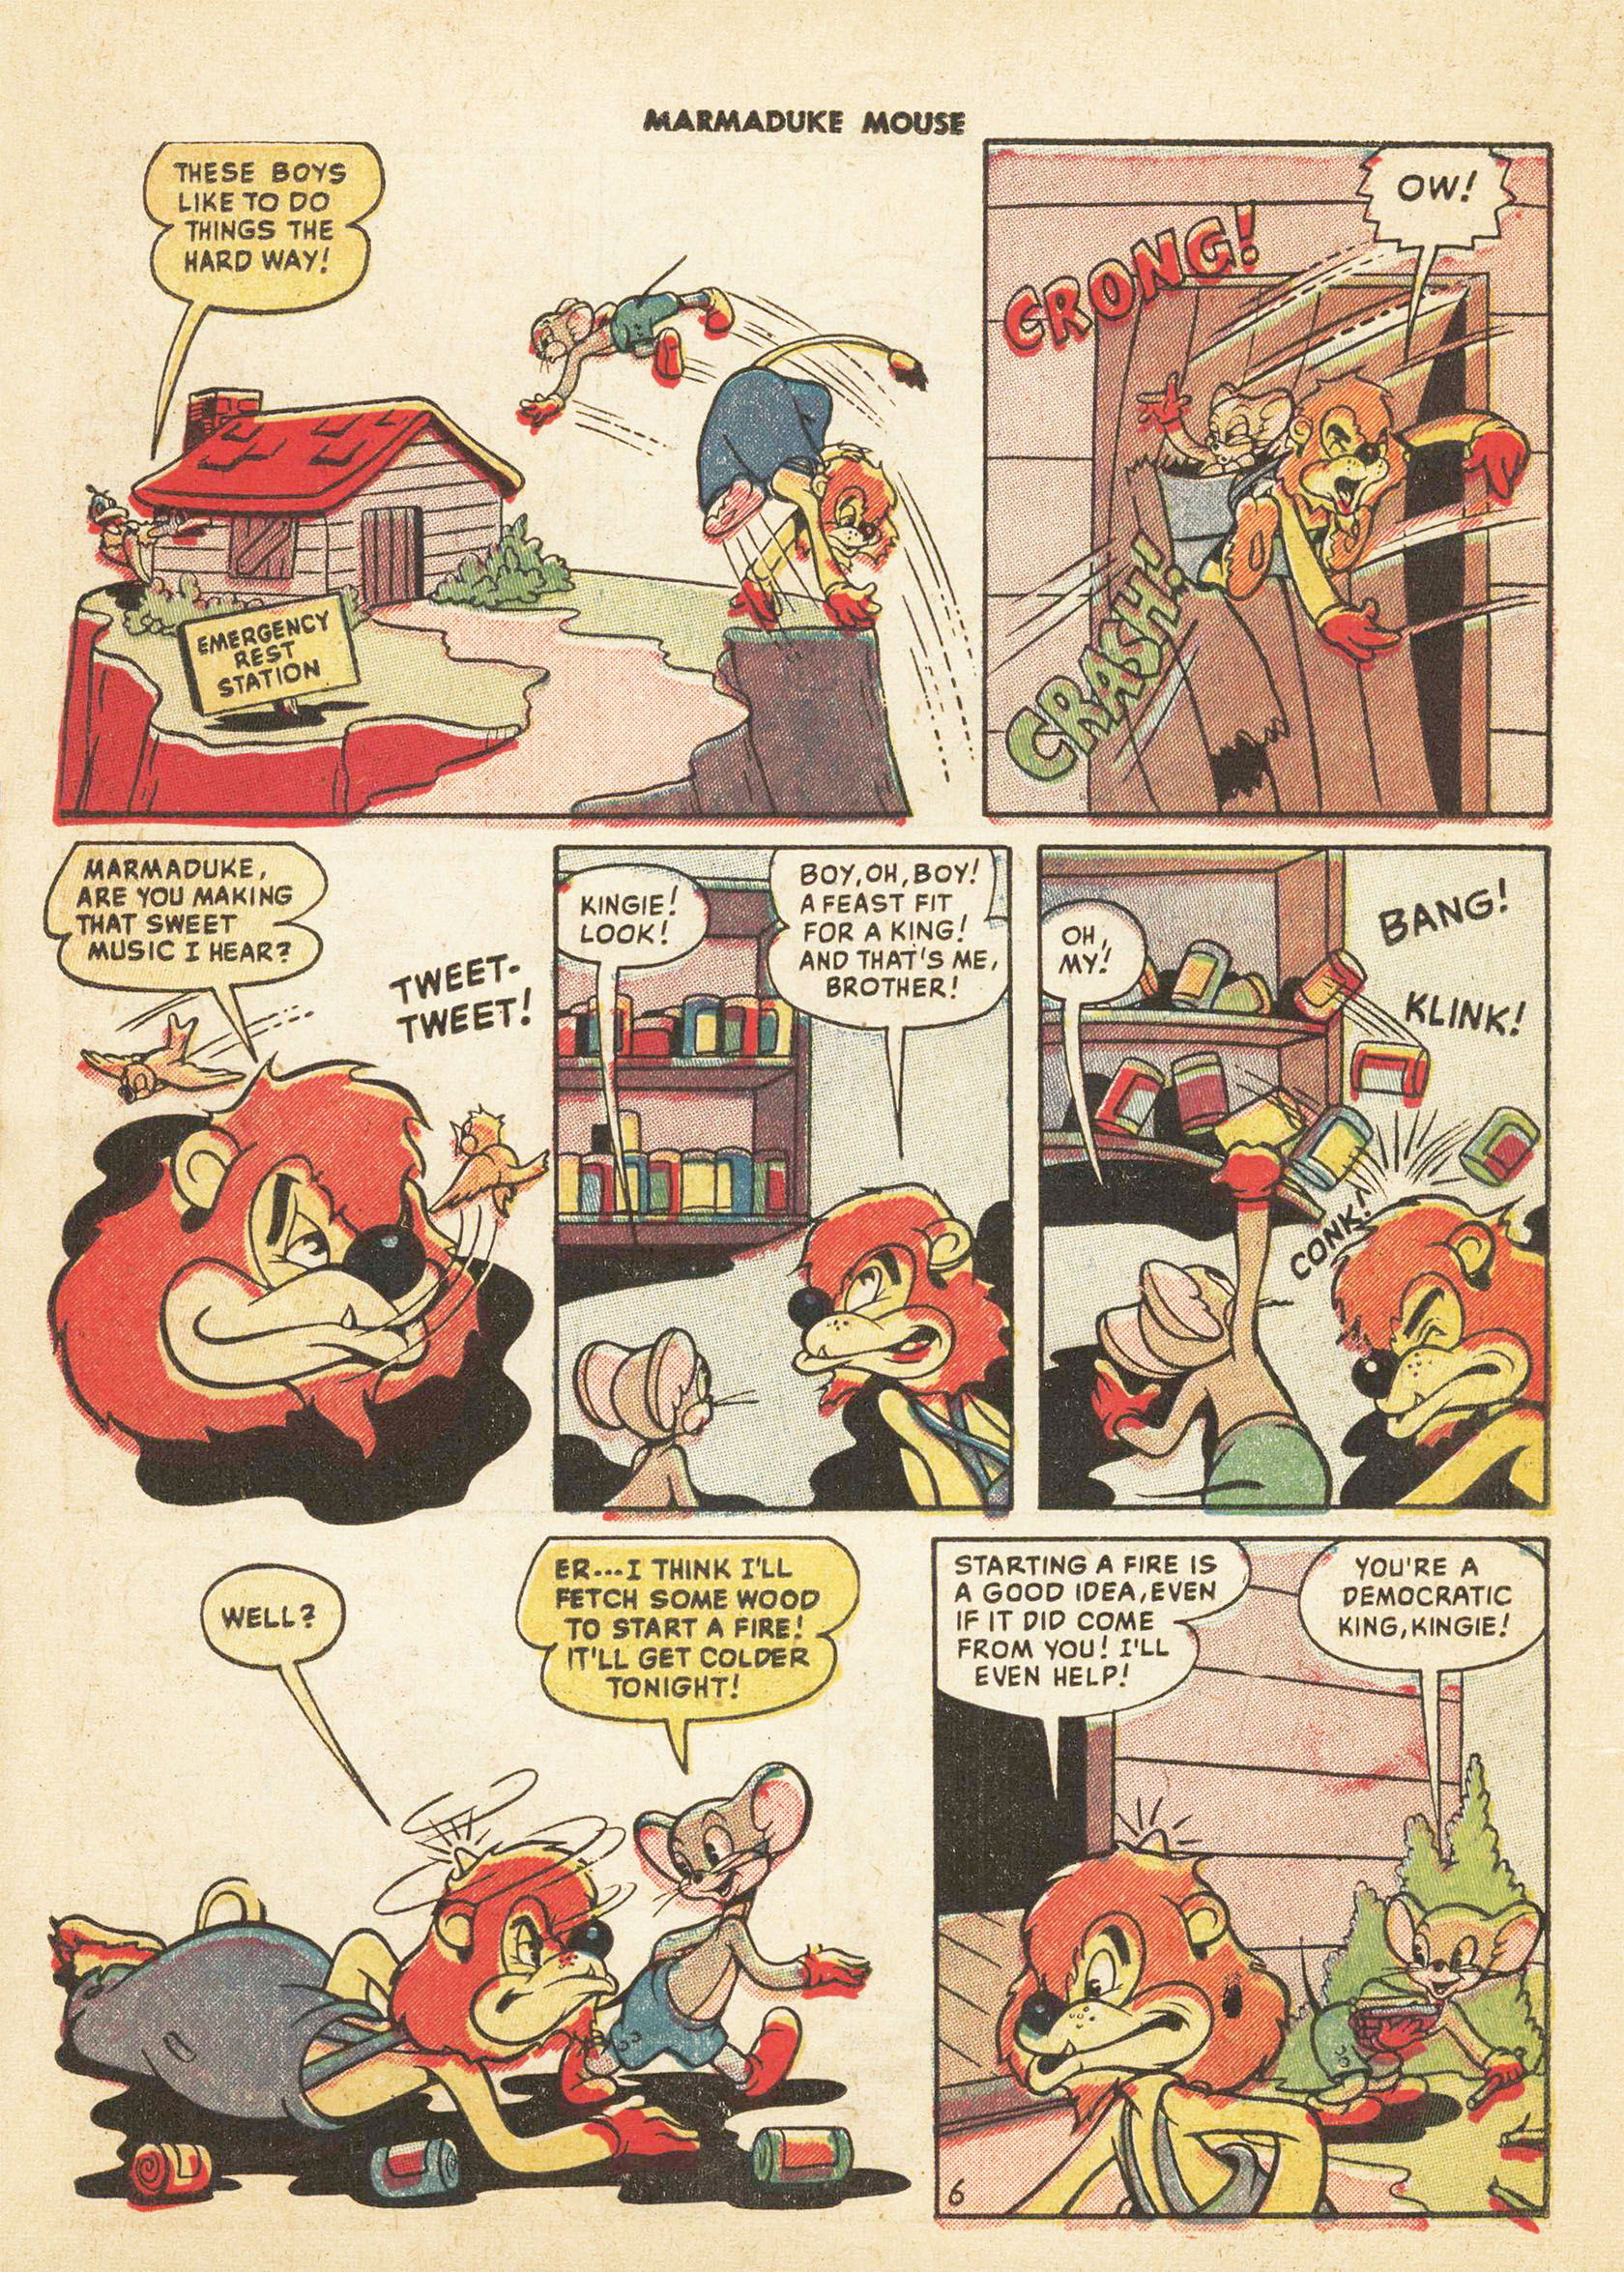 Read online Marmaduke Mouse comic -  Issue #20 - 8